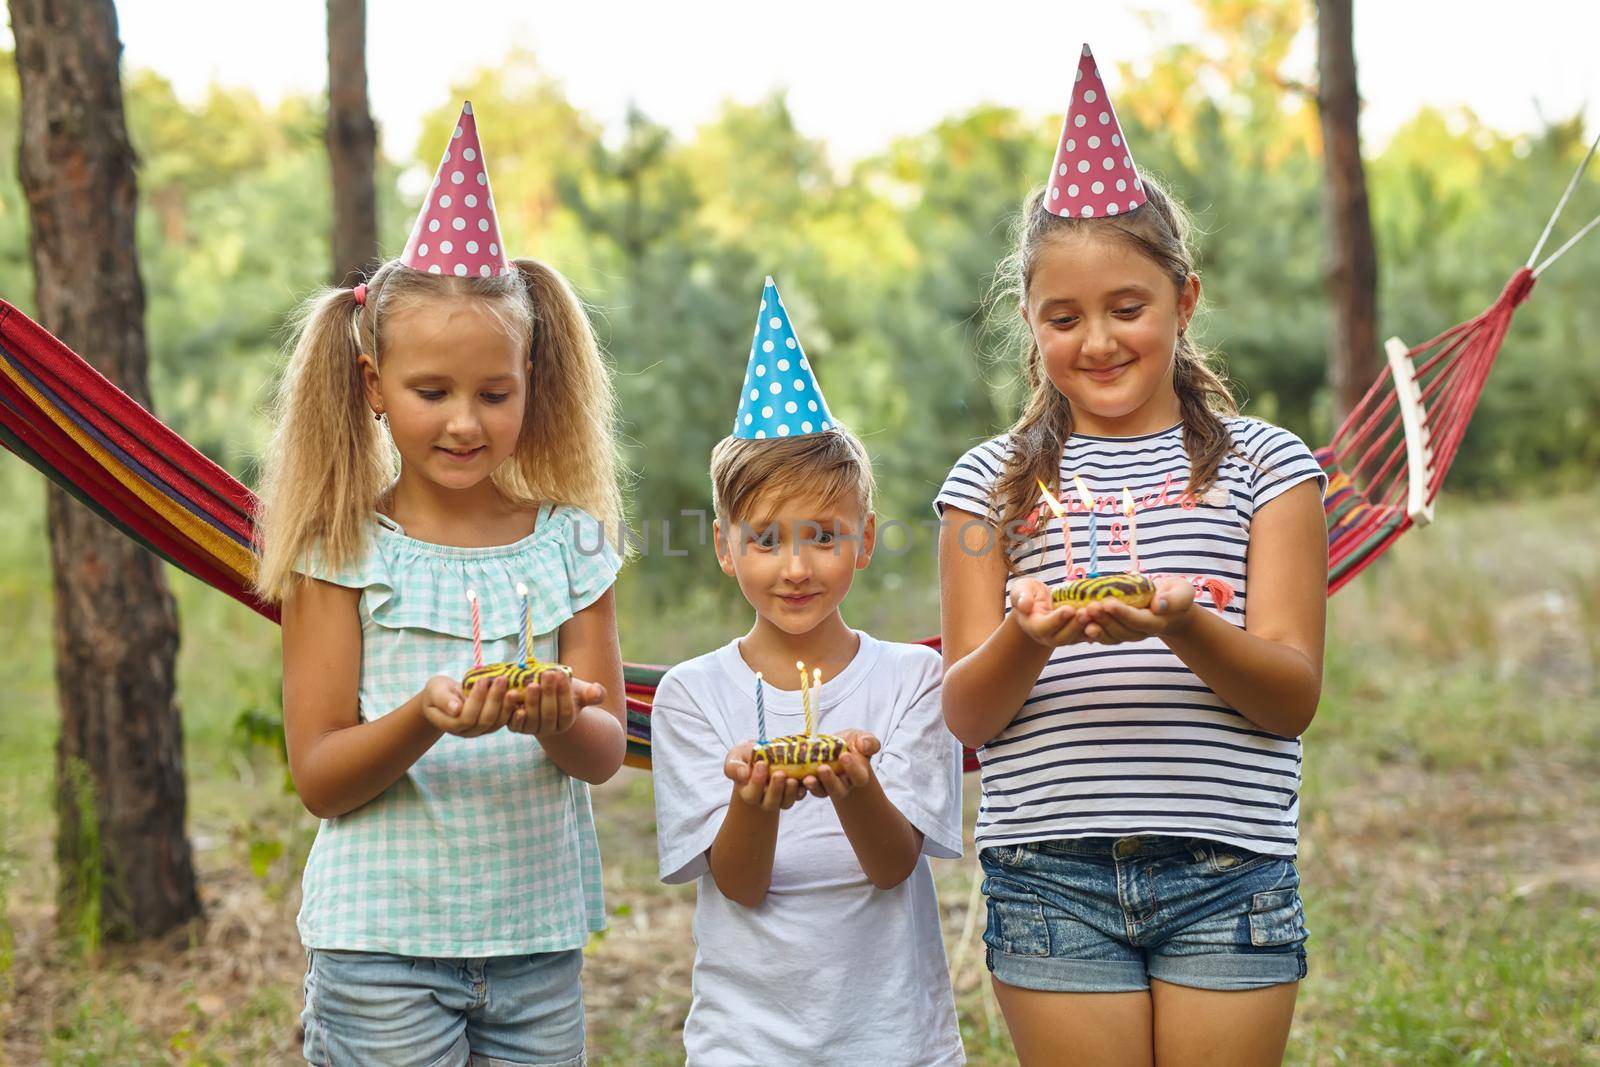 Children holding birthday cakes with burning candles. Kids party decoration and food. Boy and girls celebrating birthday in the garden with hammock. Kids with sweets.